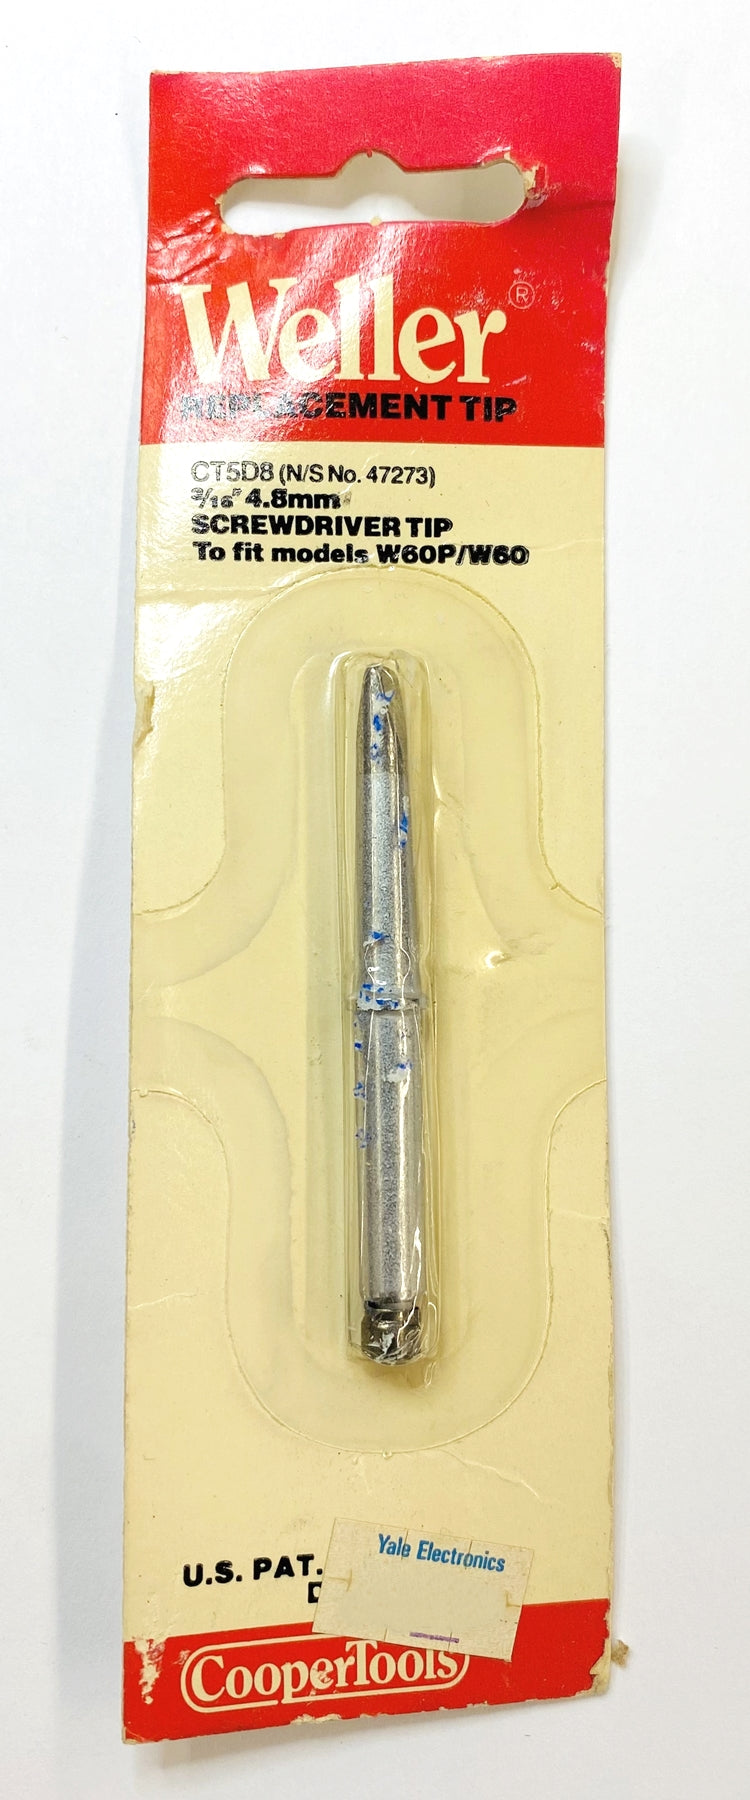 Weller CT5D8 800° 3/16" Screwdriver Tip for W60P & W60P3 Soldering Irons